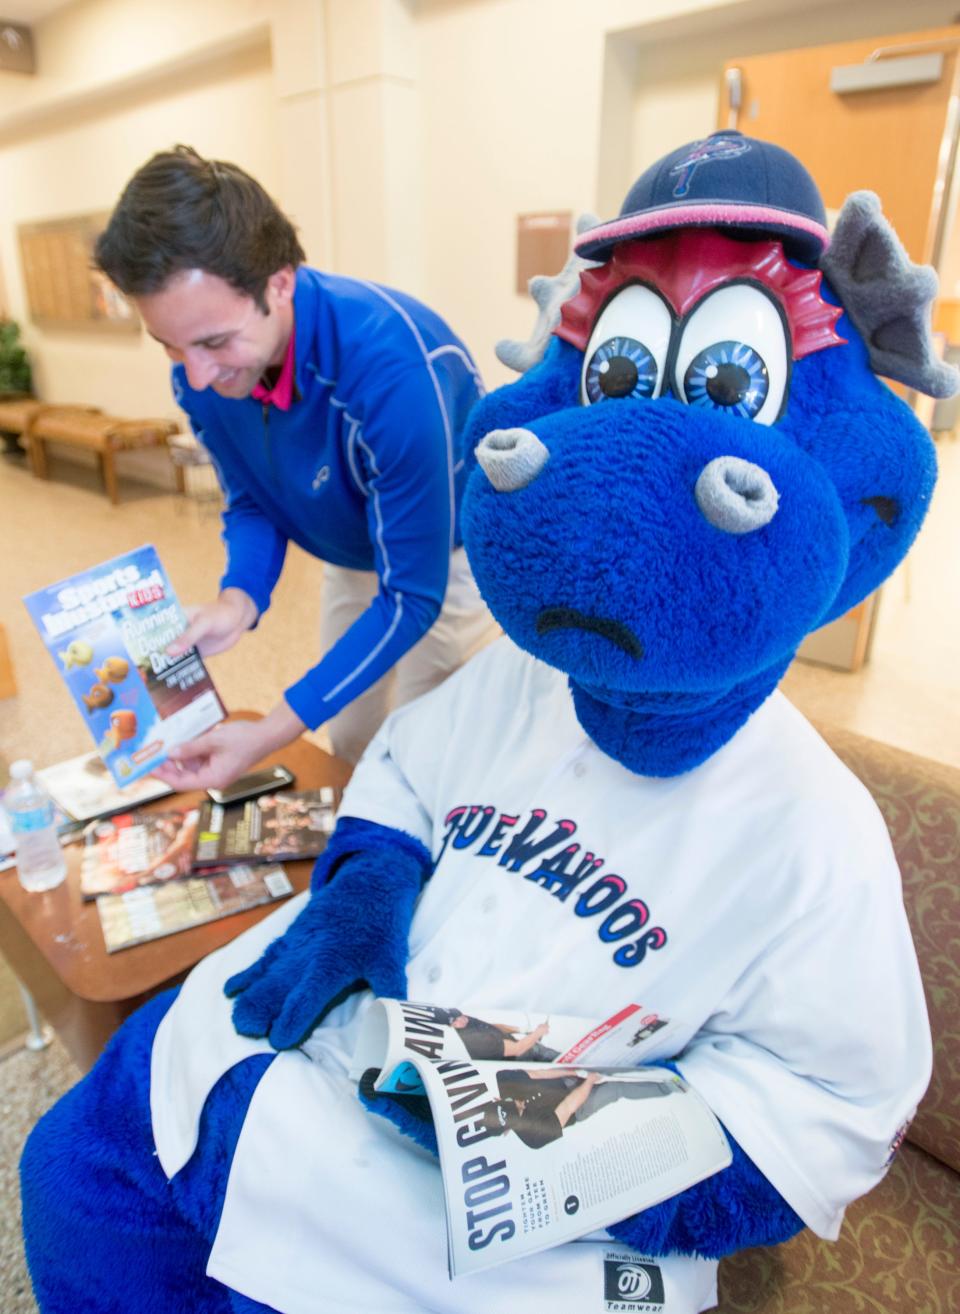 Blue Wahoos mascot Kazoo reacts to Chris Garagiola showing him a magazine cover with golfish while visiting the Gulf Coast Veterans Health Care System - Joint Ambulatory Care Center: Outpatient Clinic in honor of Armed Forces Day in Pensacola on Friday, May 19, 2017.